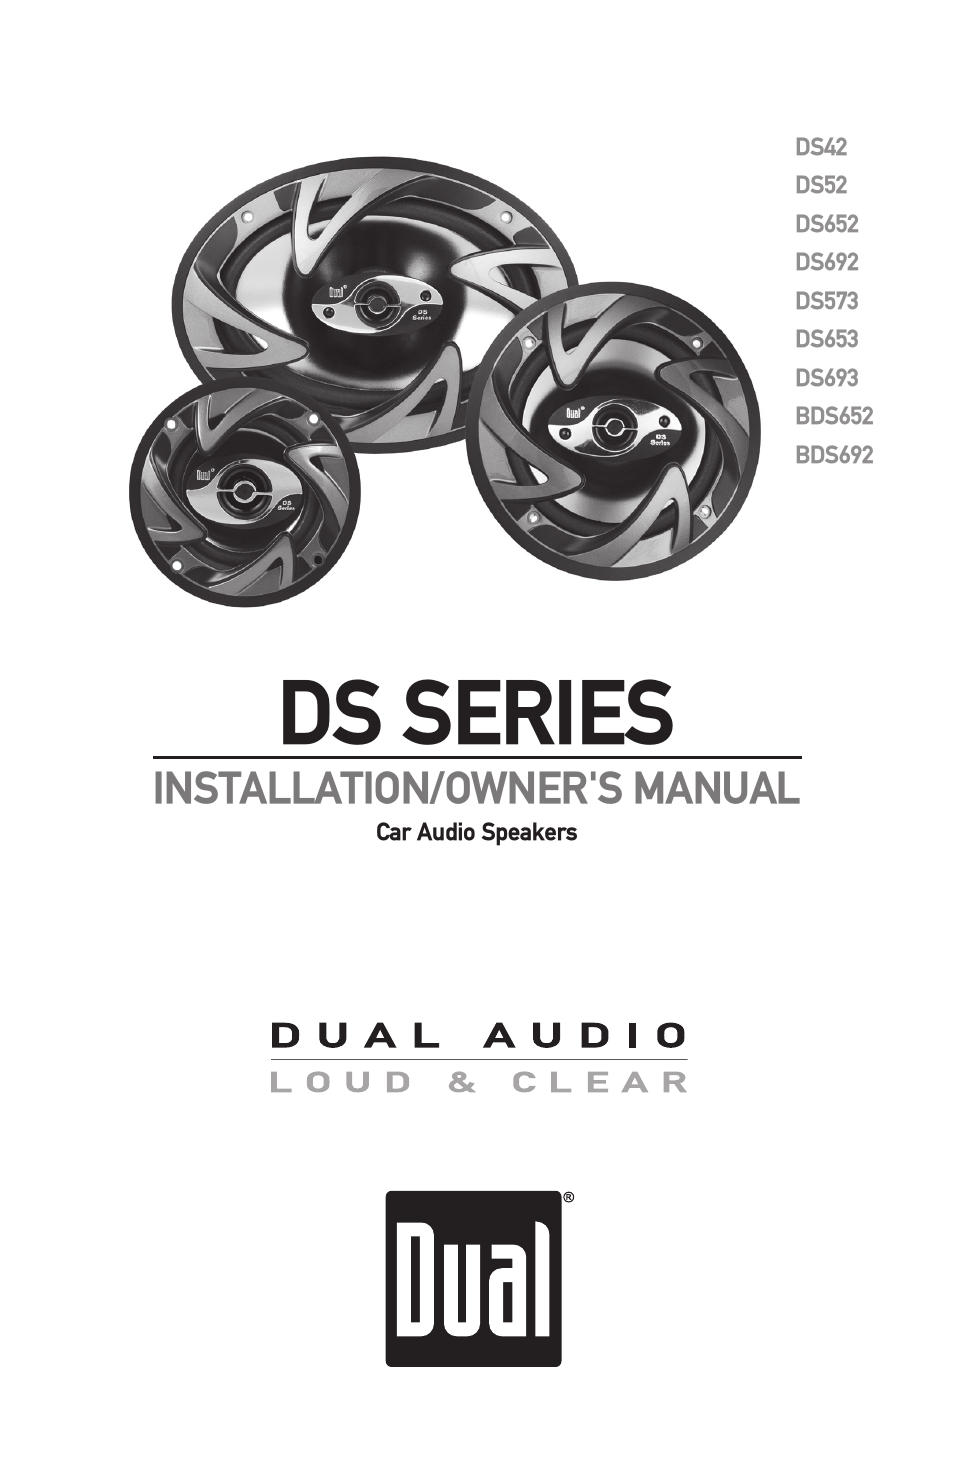 DS SERIES DS652